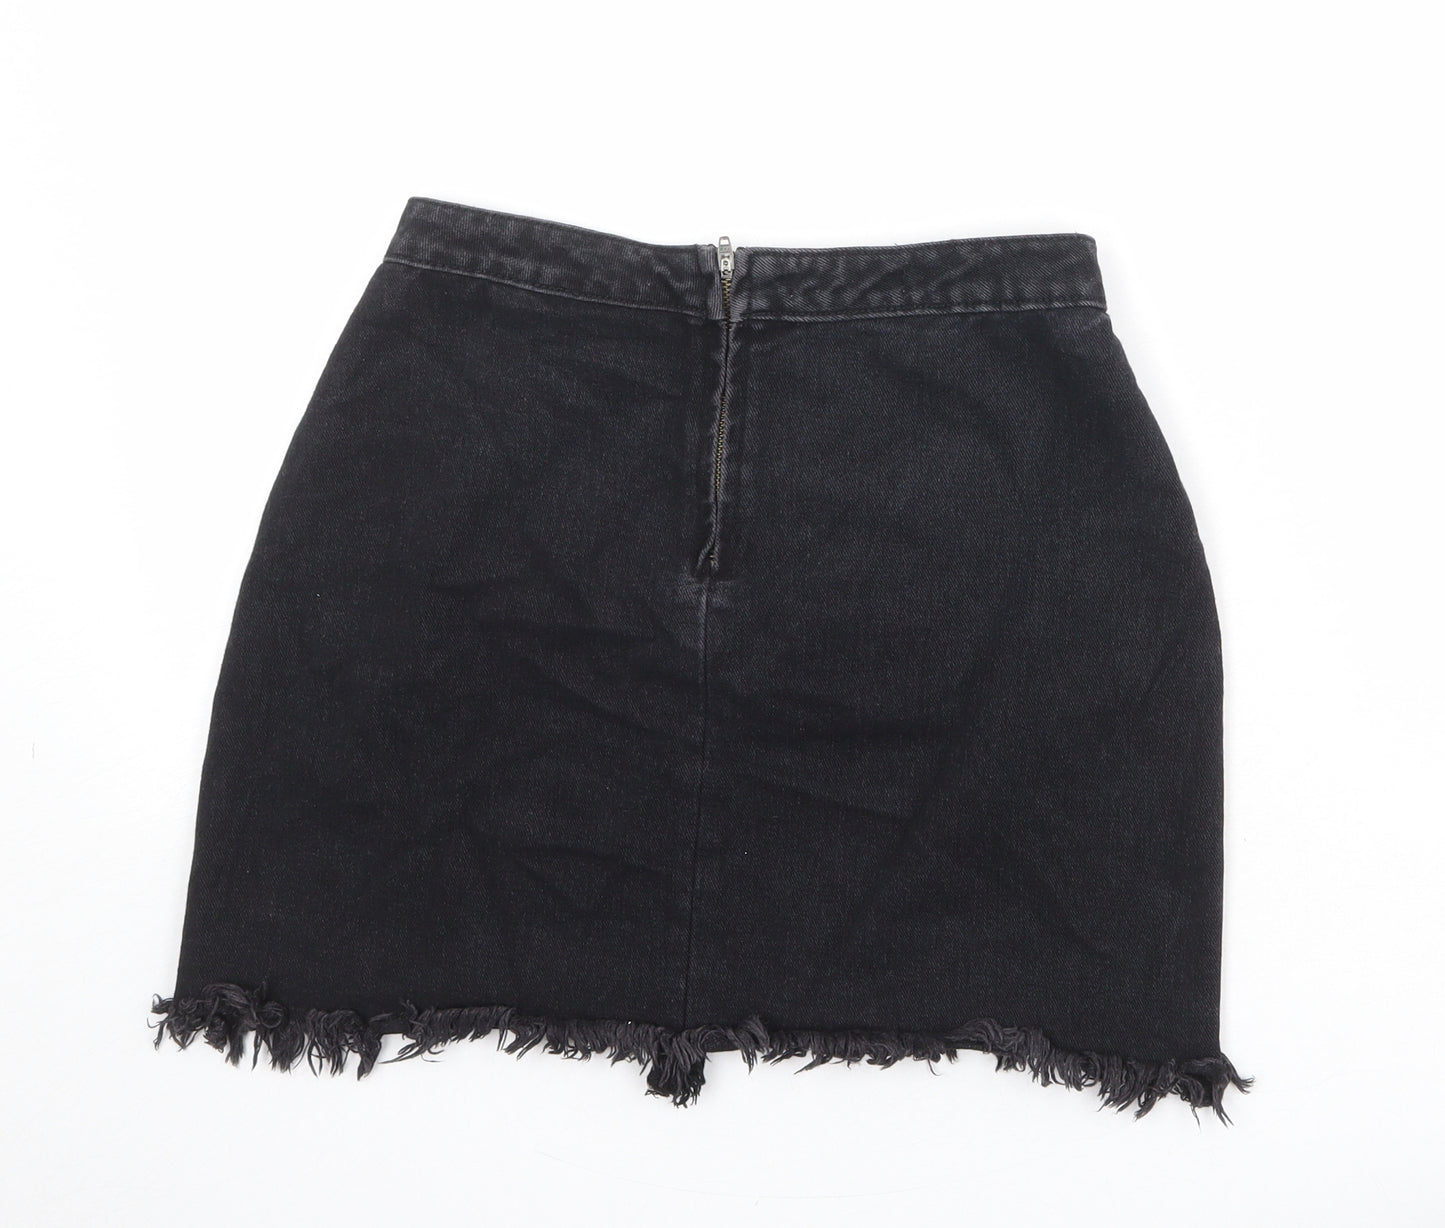 Missguided Womens Black Cotton A-Line Skirt Size 10 Zip